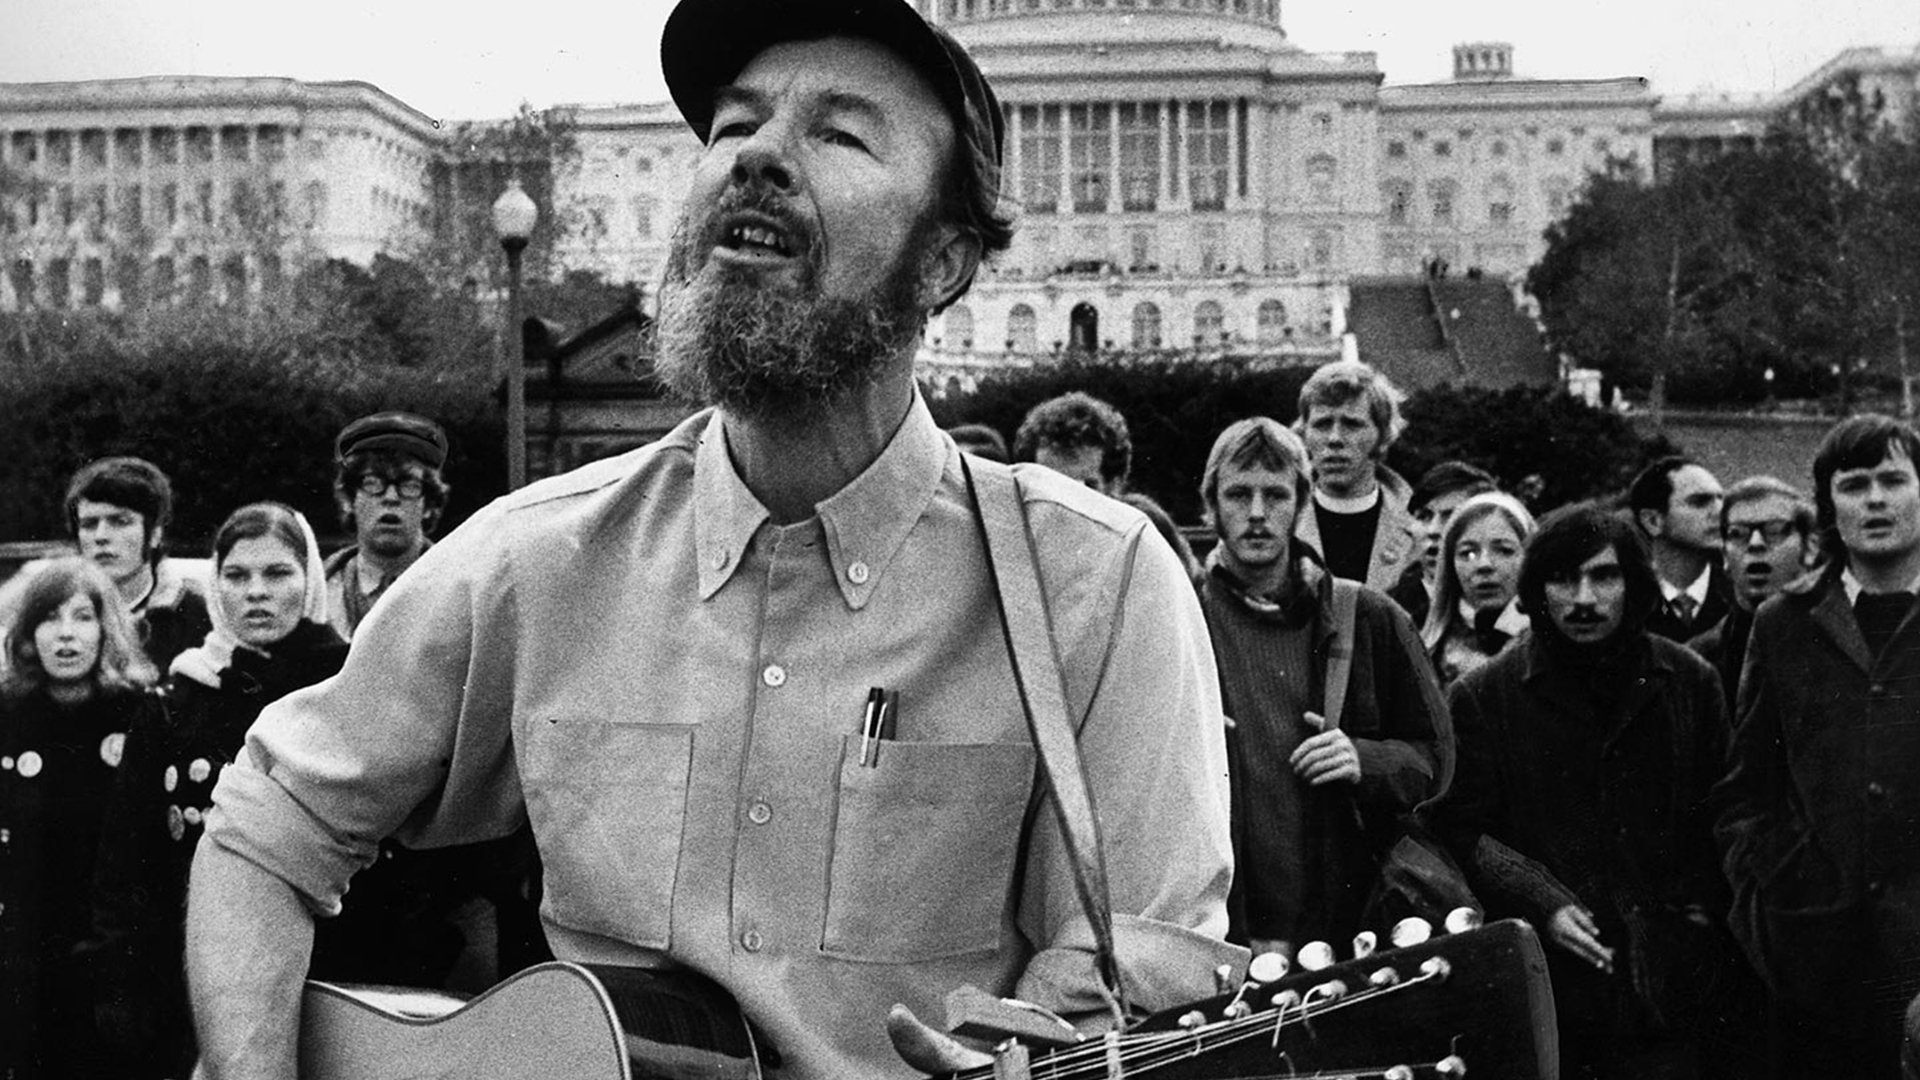 5 Days of Pete Seeger: Day 3, Guantanamera & Pete Seeger Fun Facts